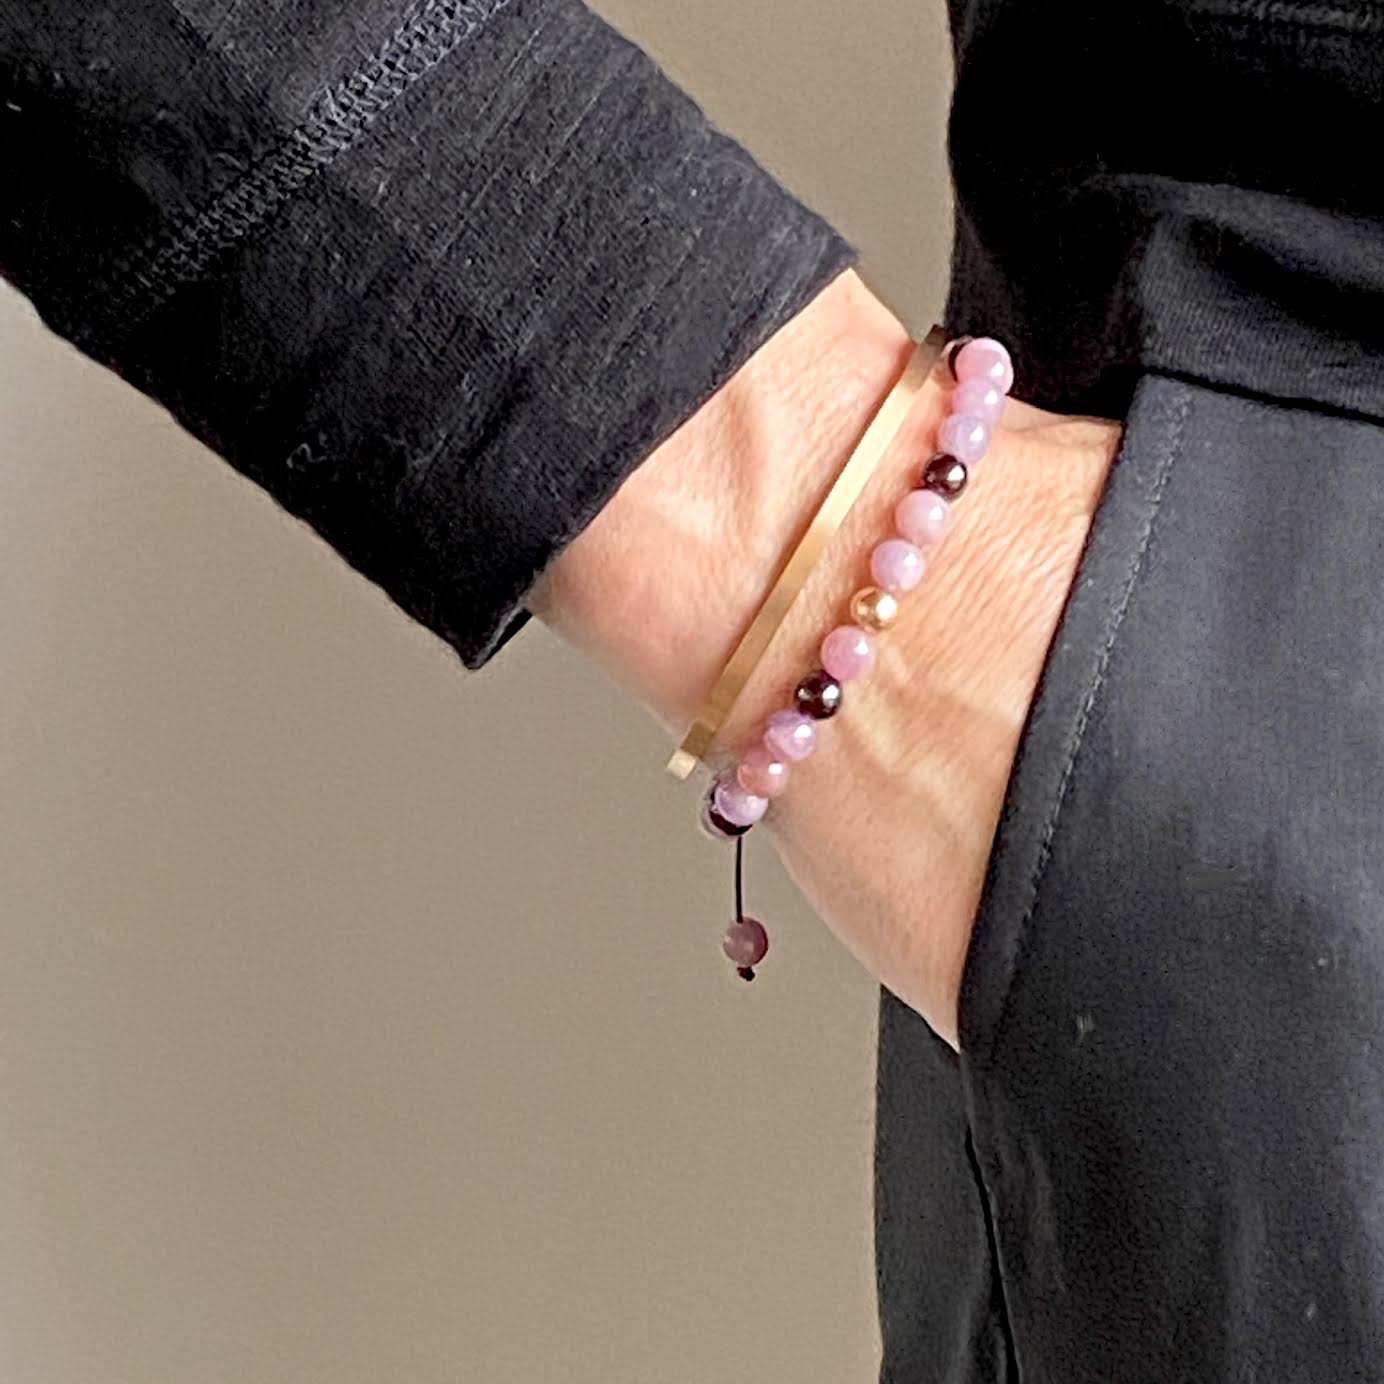 Pink Rubies honor the higher mind, bringing intuition, clarity and self-mastery. These smooth pink variety gemstones are accented with Garnet beads and your choice of a 14K solid yellow, rose or white gold bead. Hand knotted adjustable cord for a perfect fit.  Made by WristBend